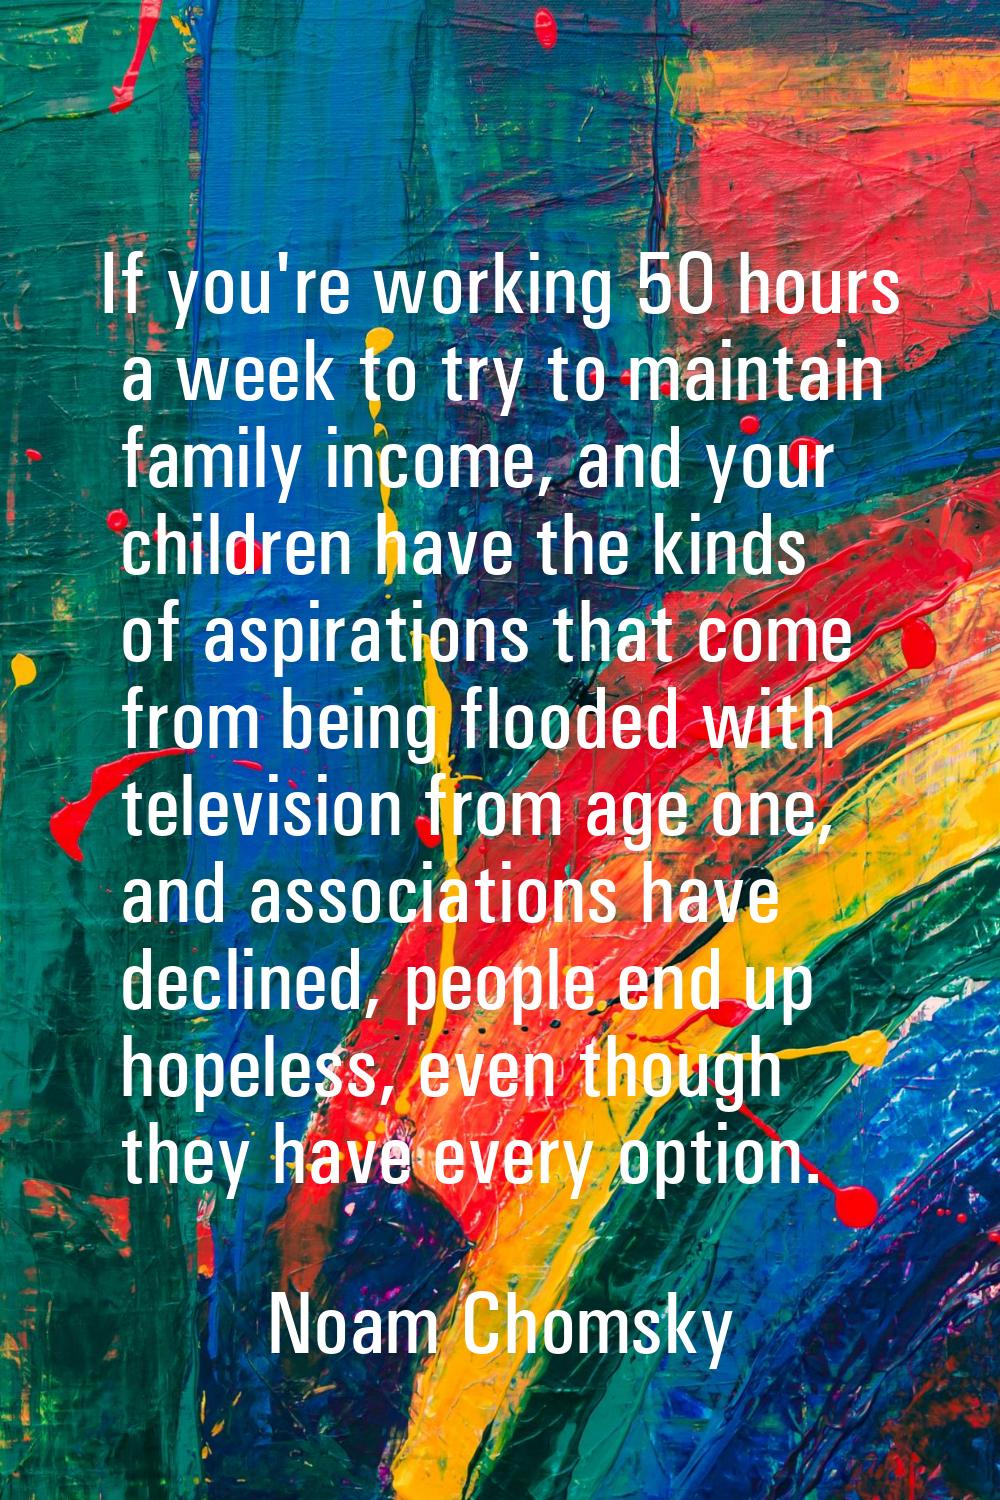 If you're working 50 hours a week to try to maintain family income, and your children have the kind